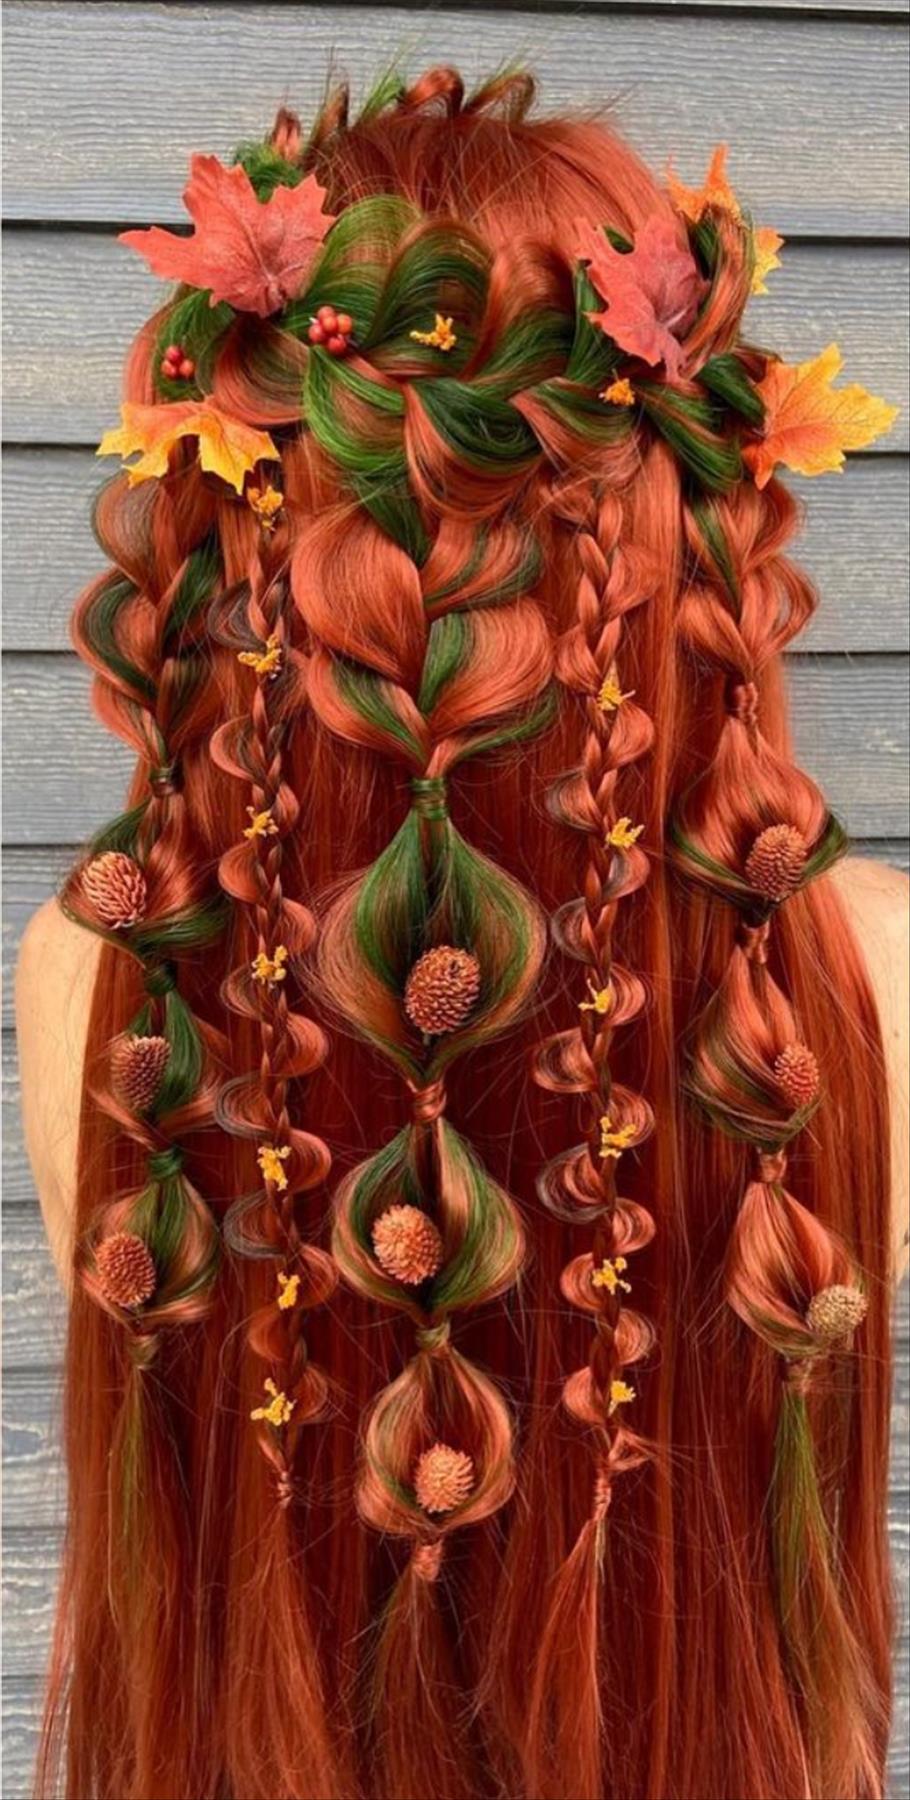 Cool Christmas hairstyles design